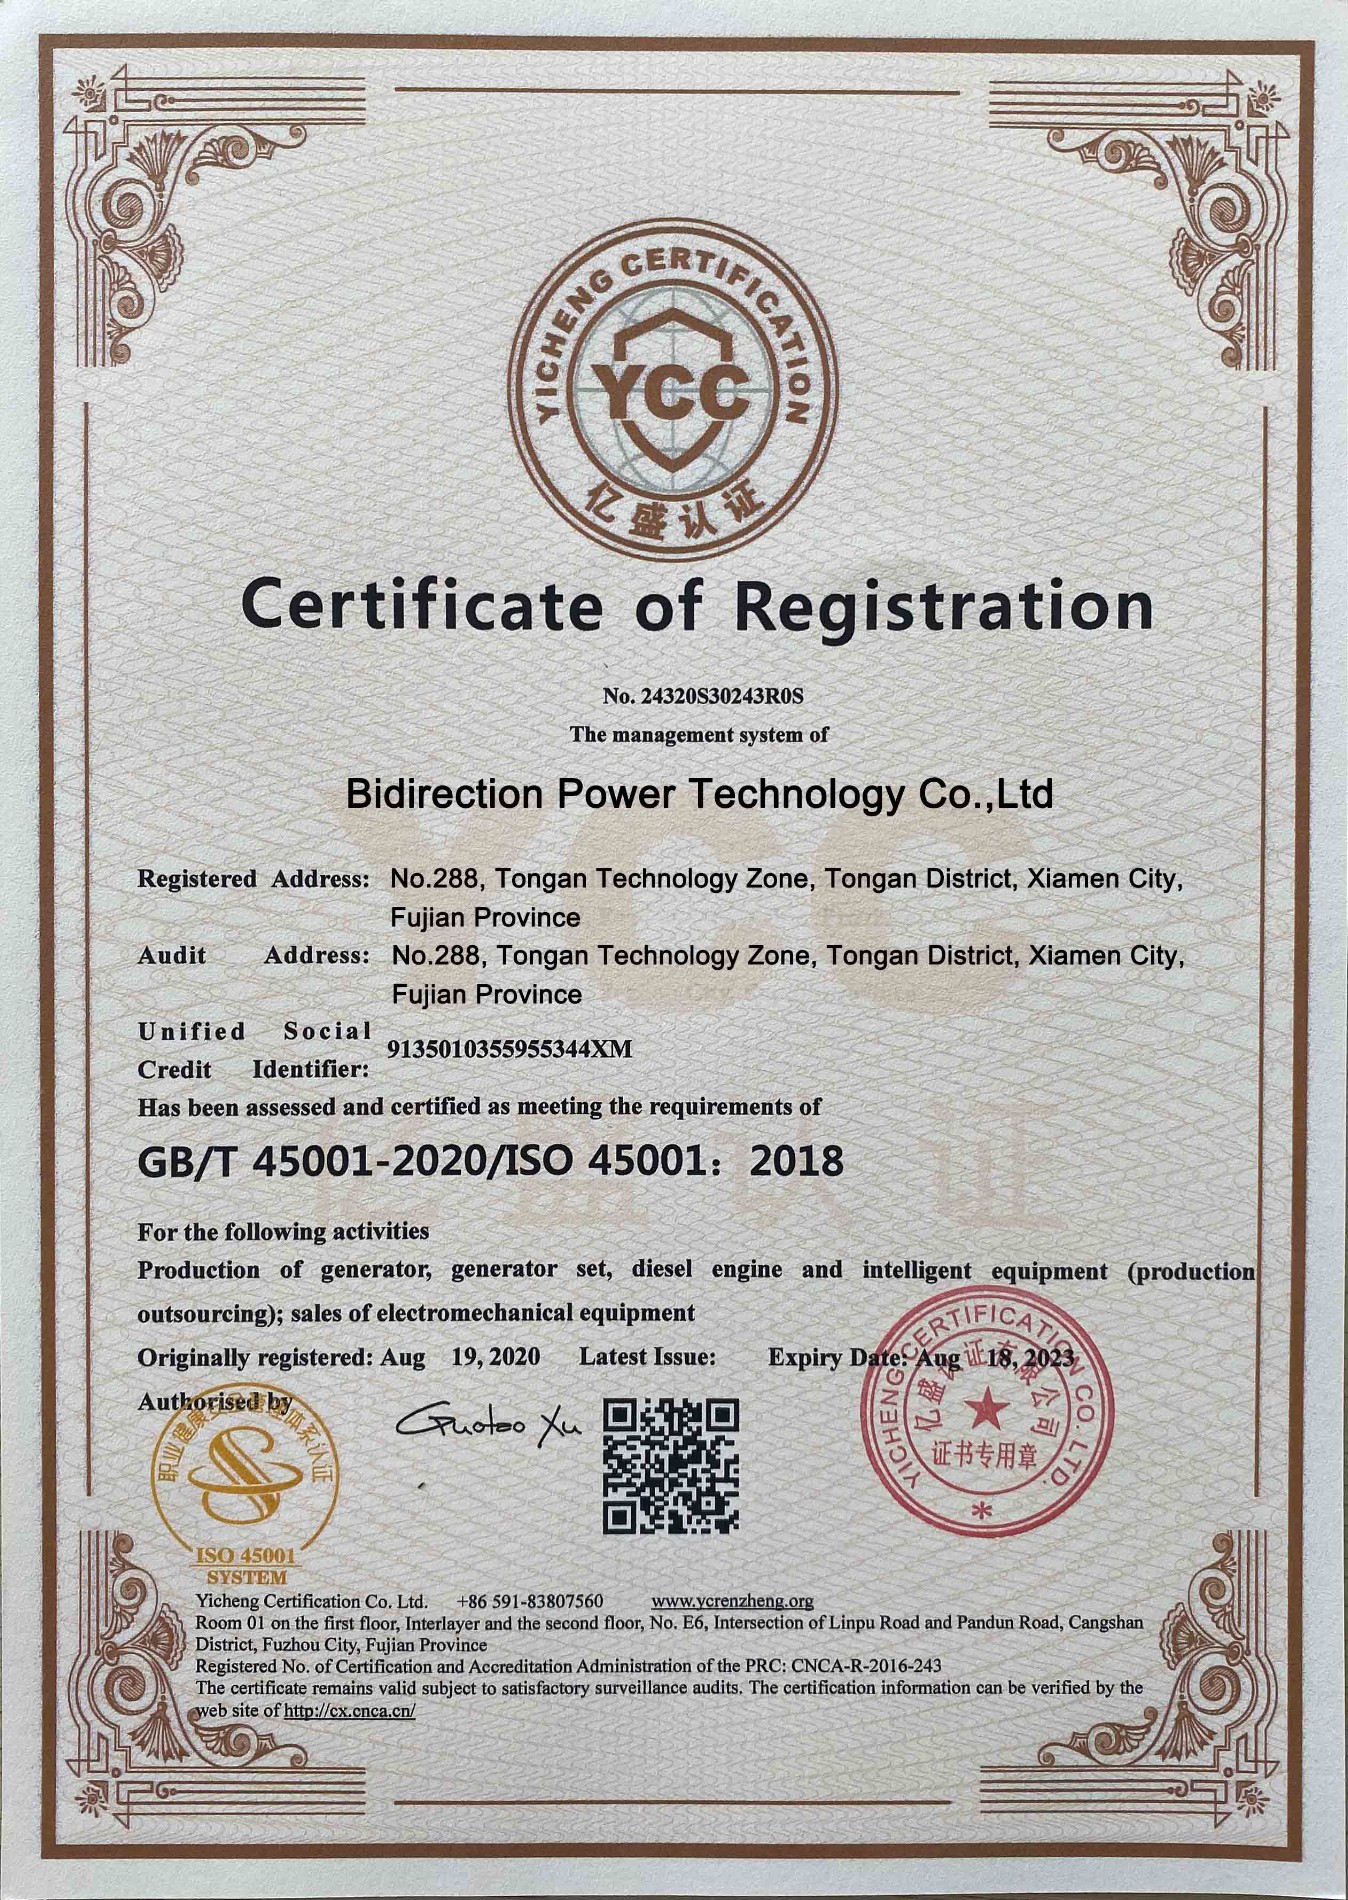 Bidirection Power Technology Authorised by Certificate of  Registration GB/T45001-2020/ISO 45001:2018